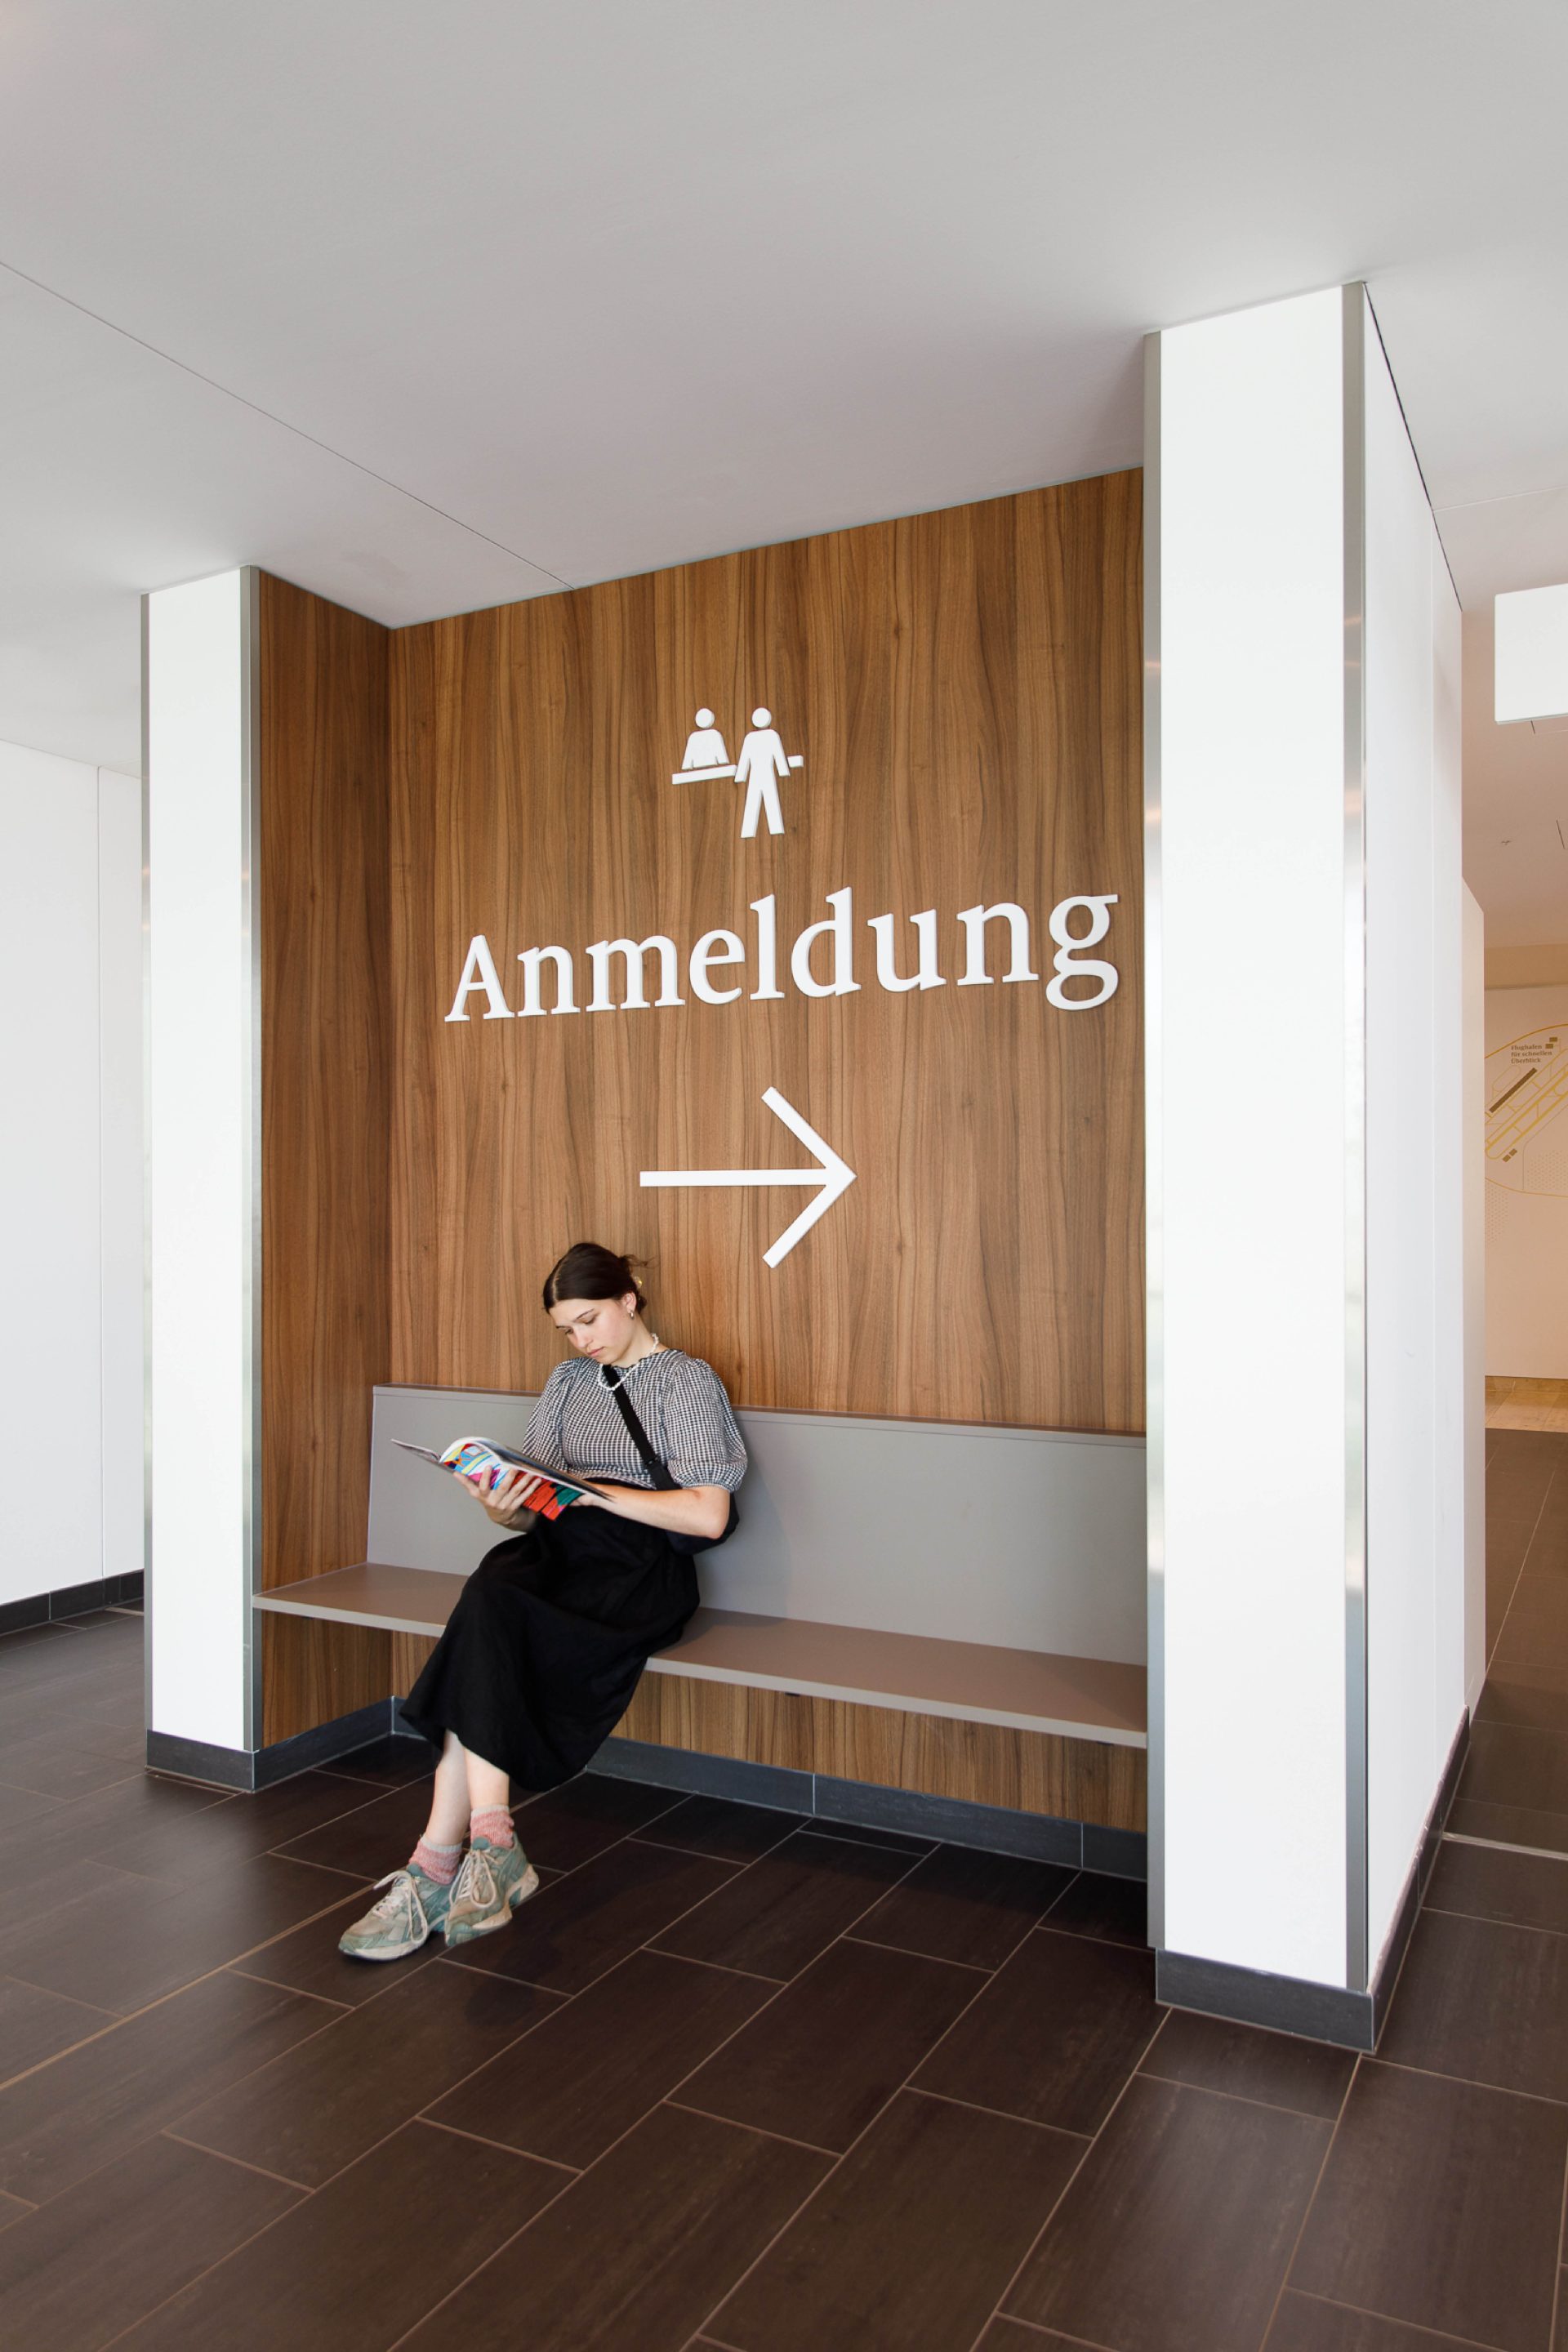 Signpost with writing and pictogram to the registration area in a seating niche where a woman is sitting with a newspaper